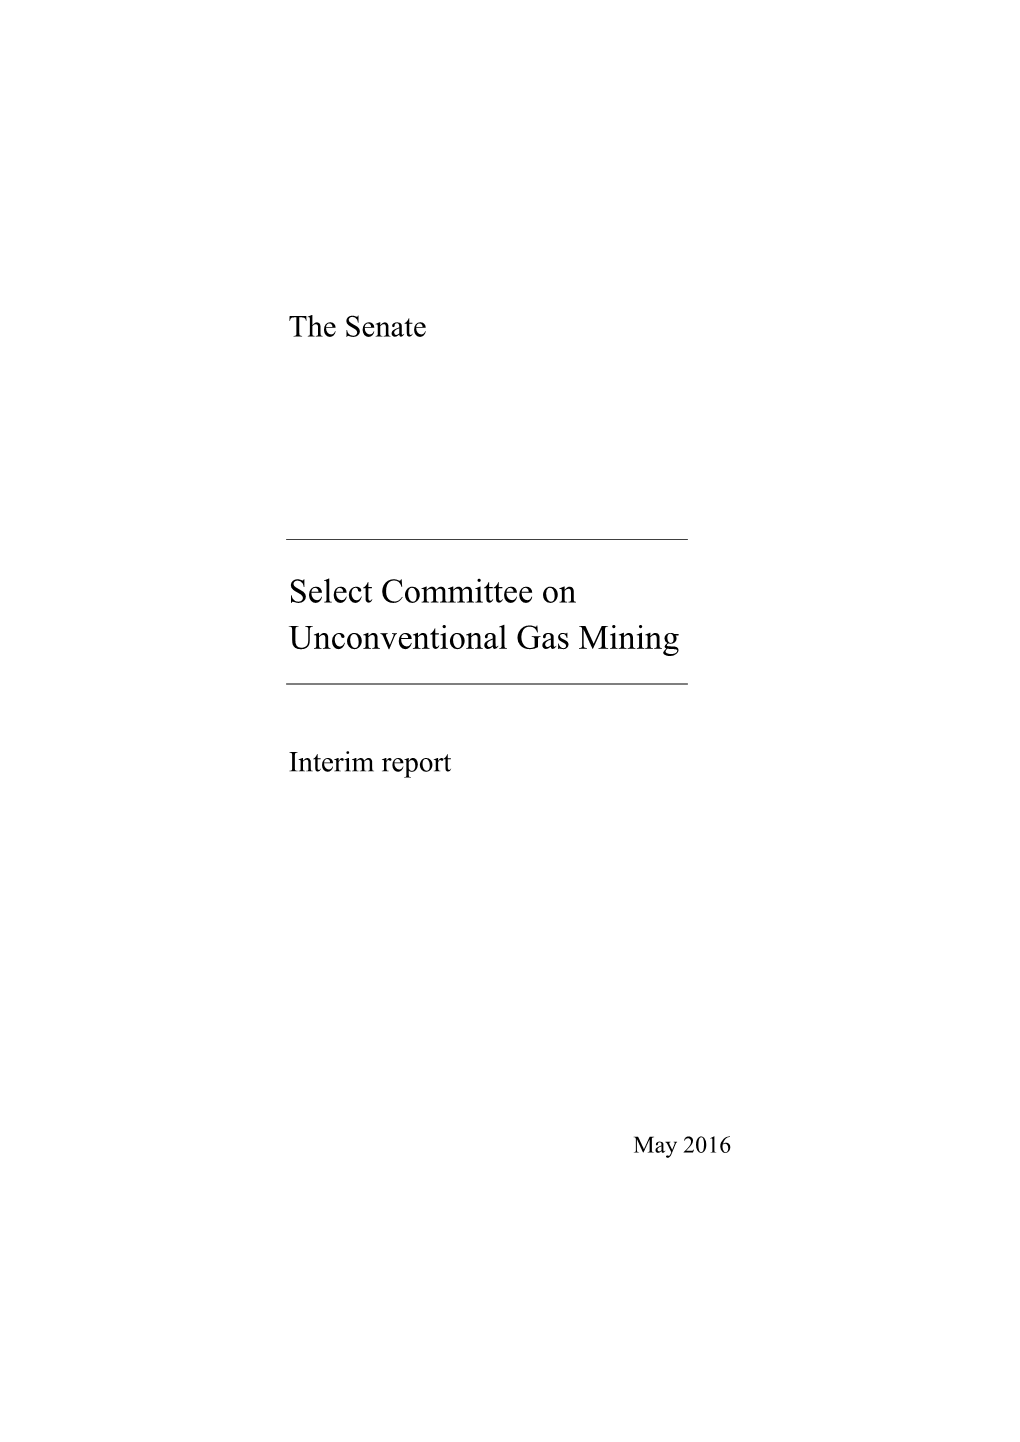 Select Committee on Unconventional Gas Mining